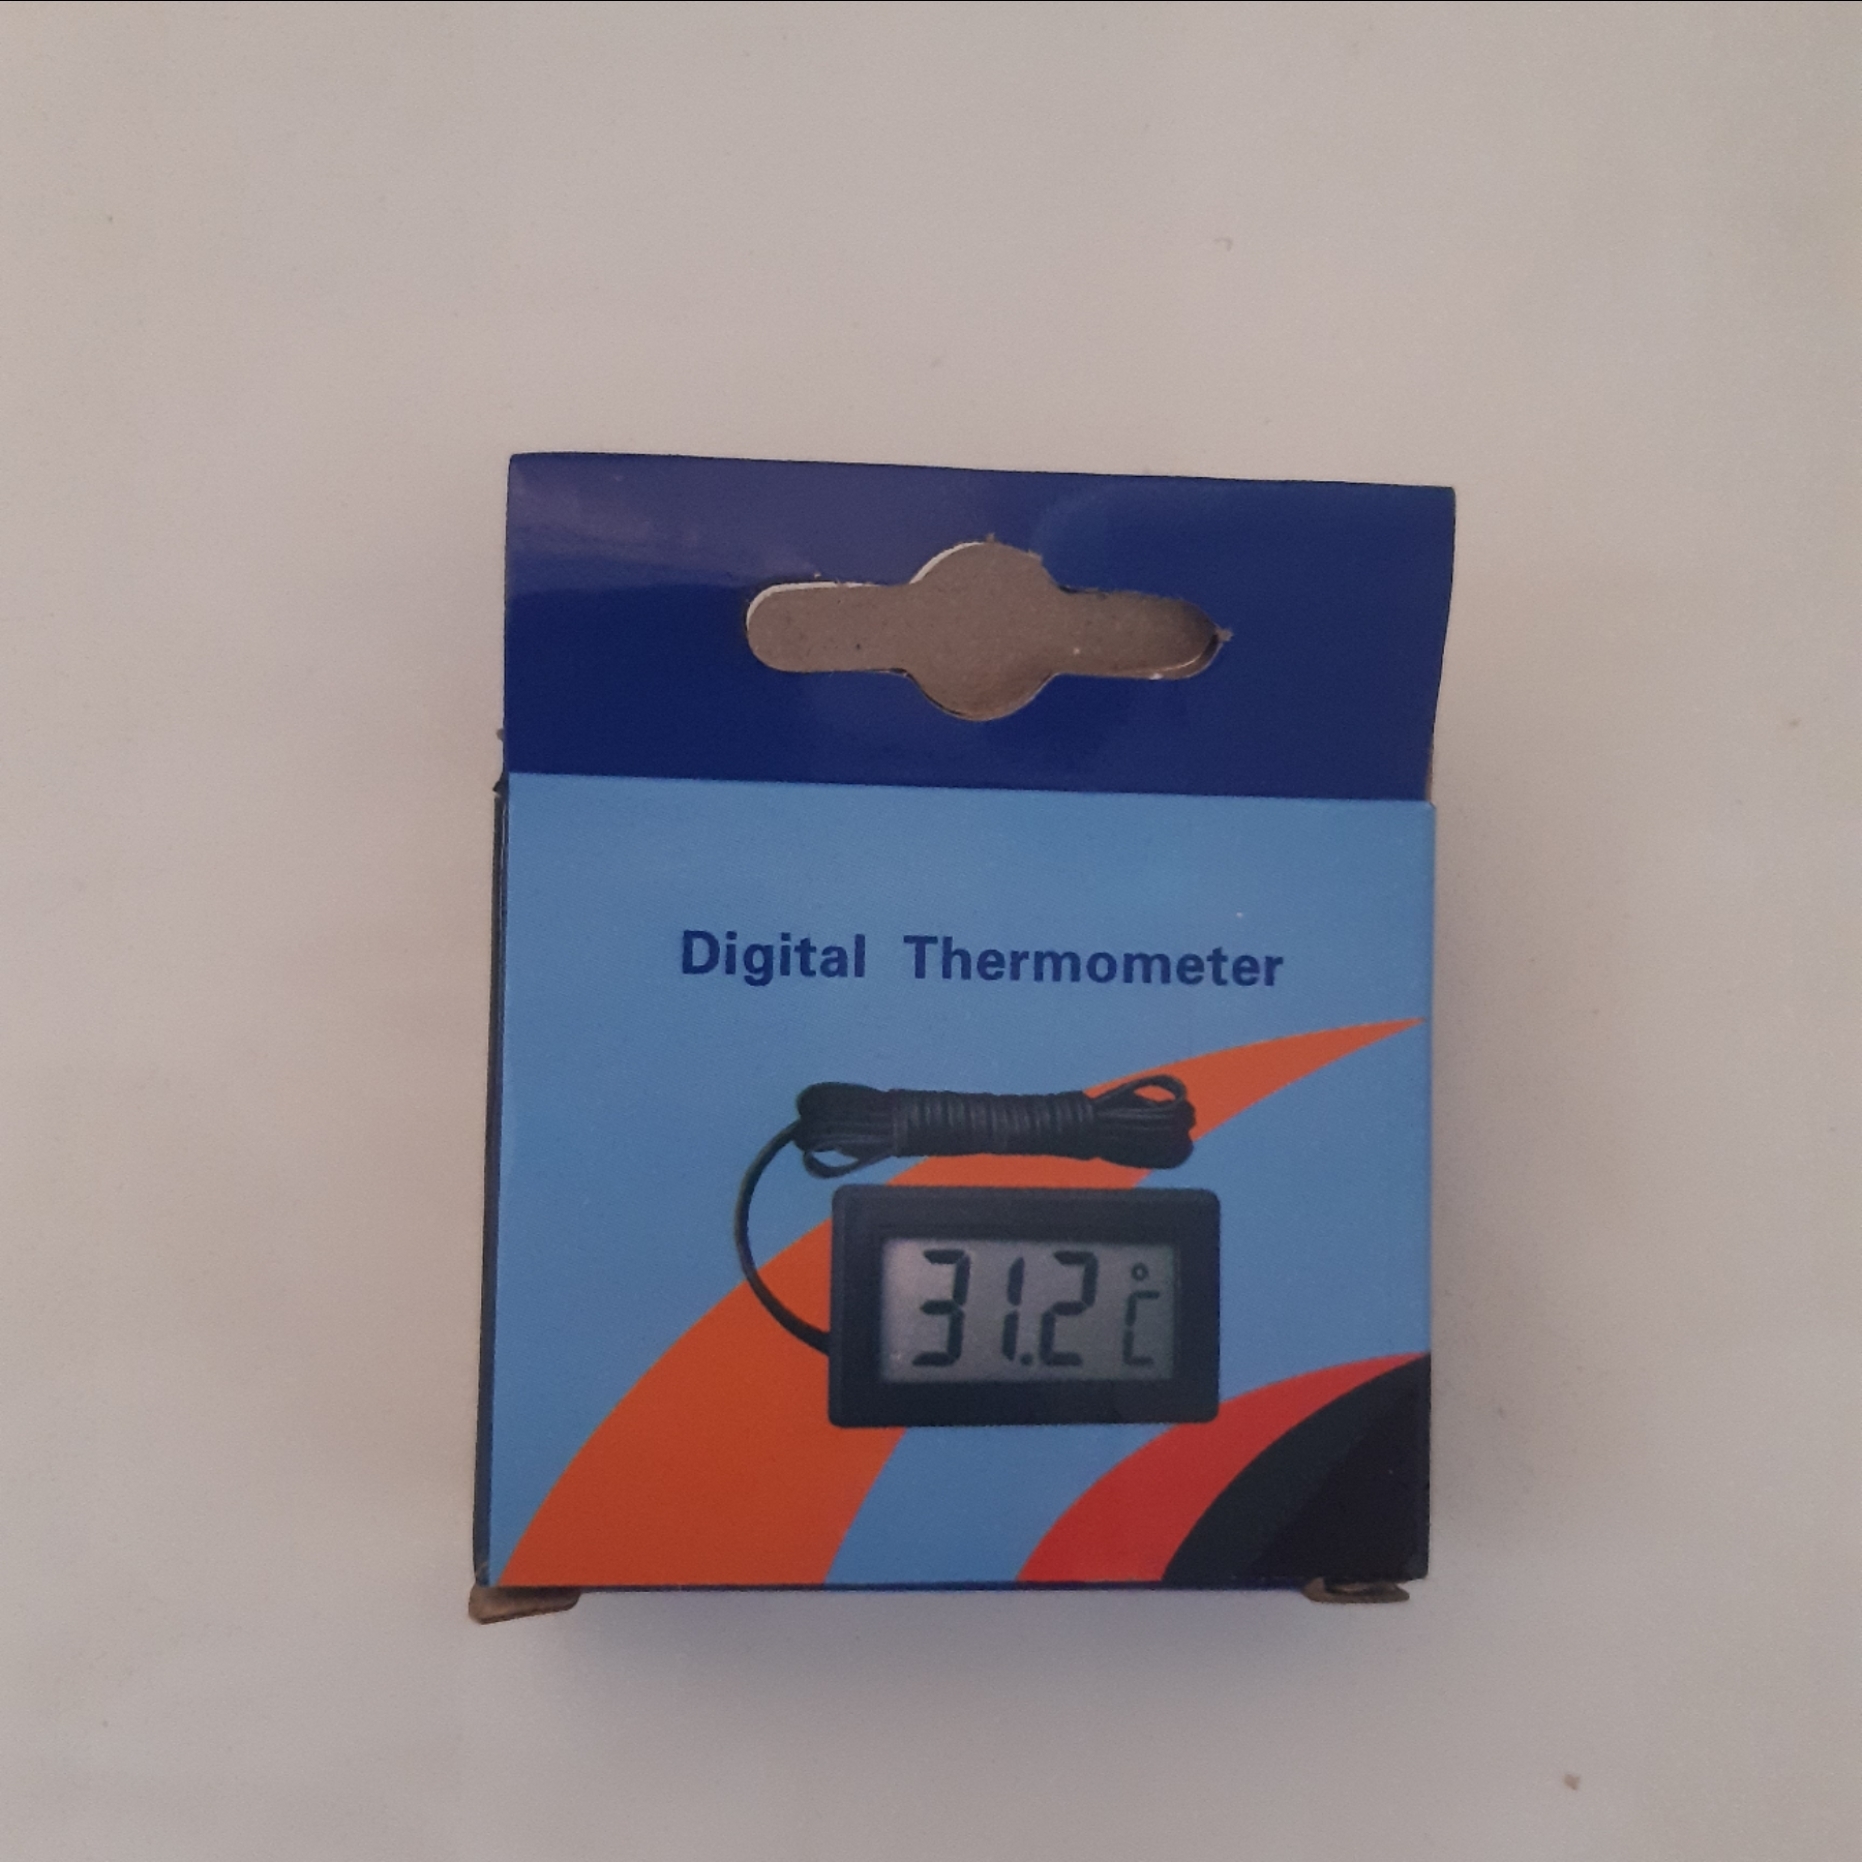 DIGITAL THERMOMETER or REFRIGERATOR THERMOMETER